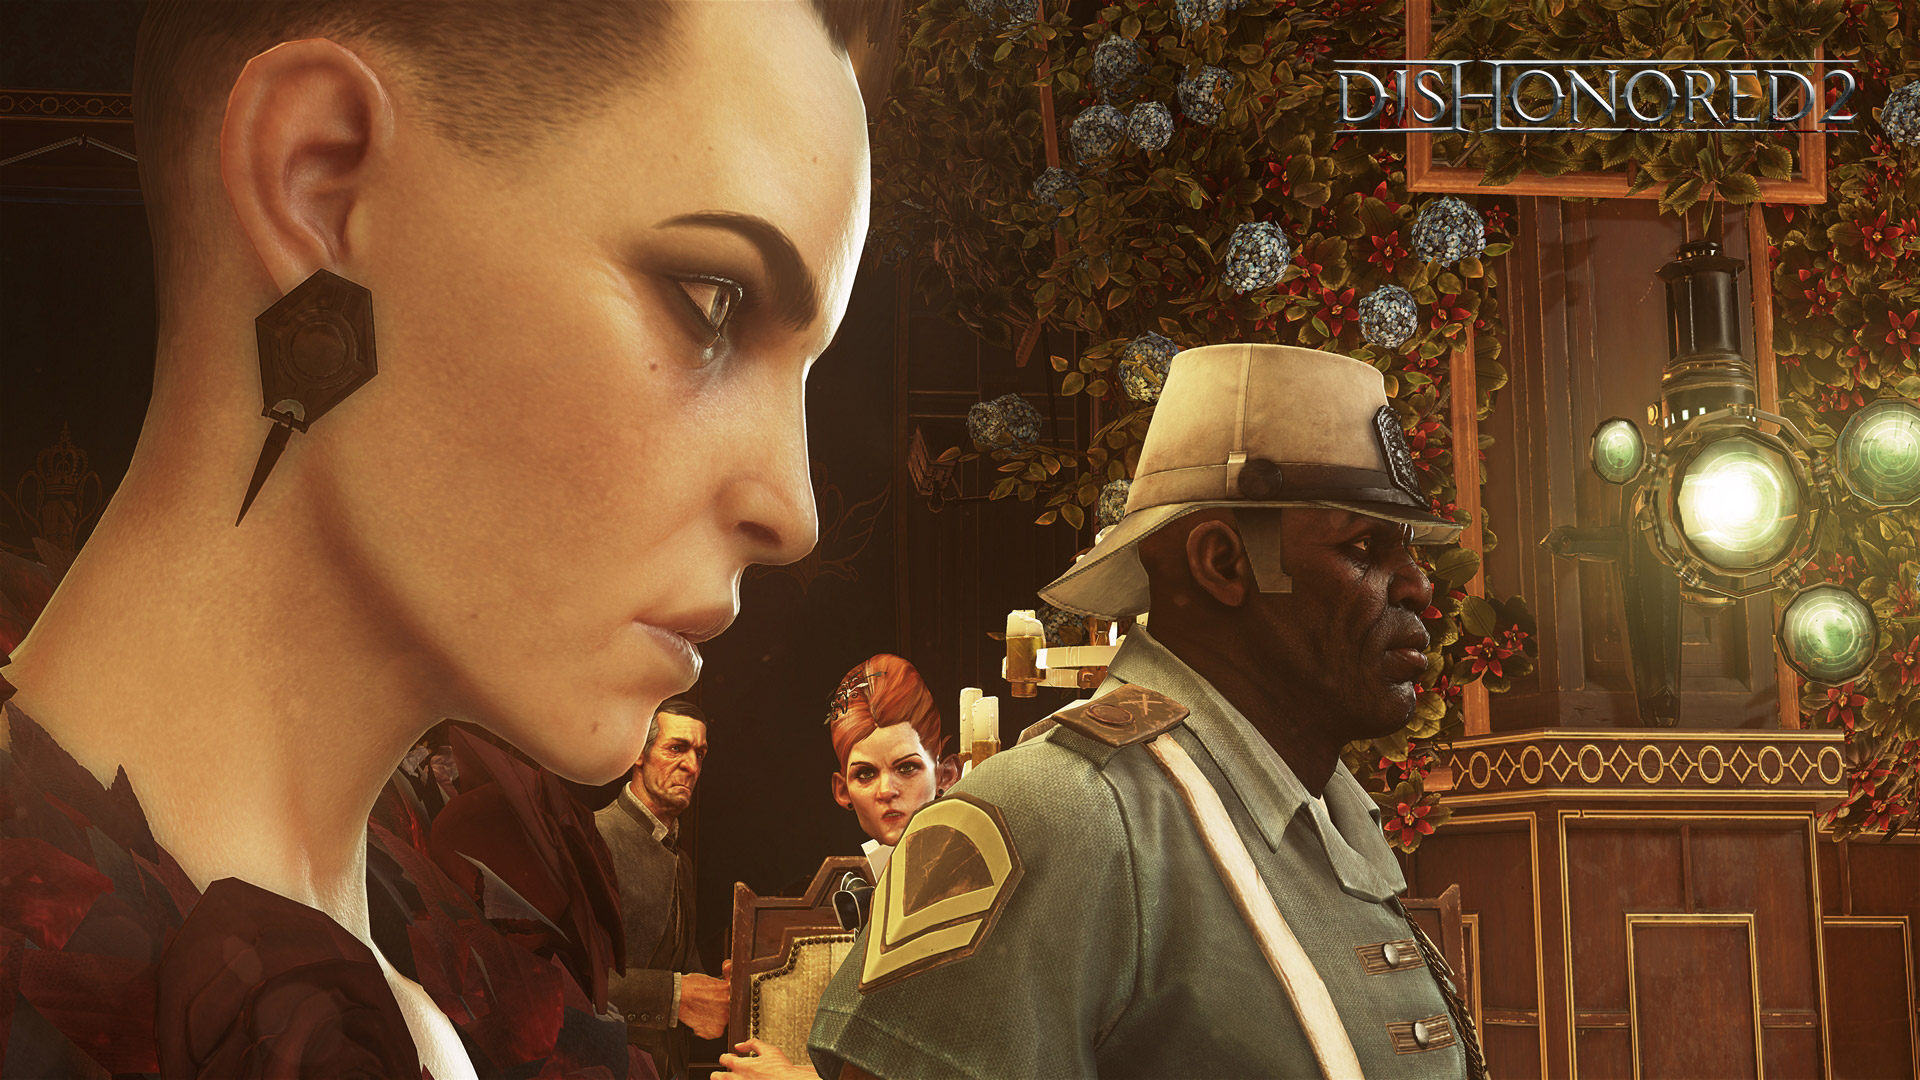 Dishonored 2 Wallpaper - Characters Of Dishonored 2 - HD Wallpaper 